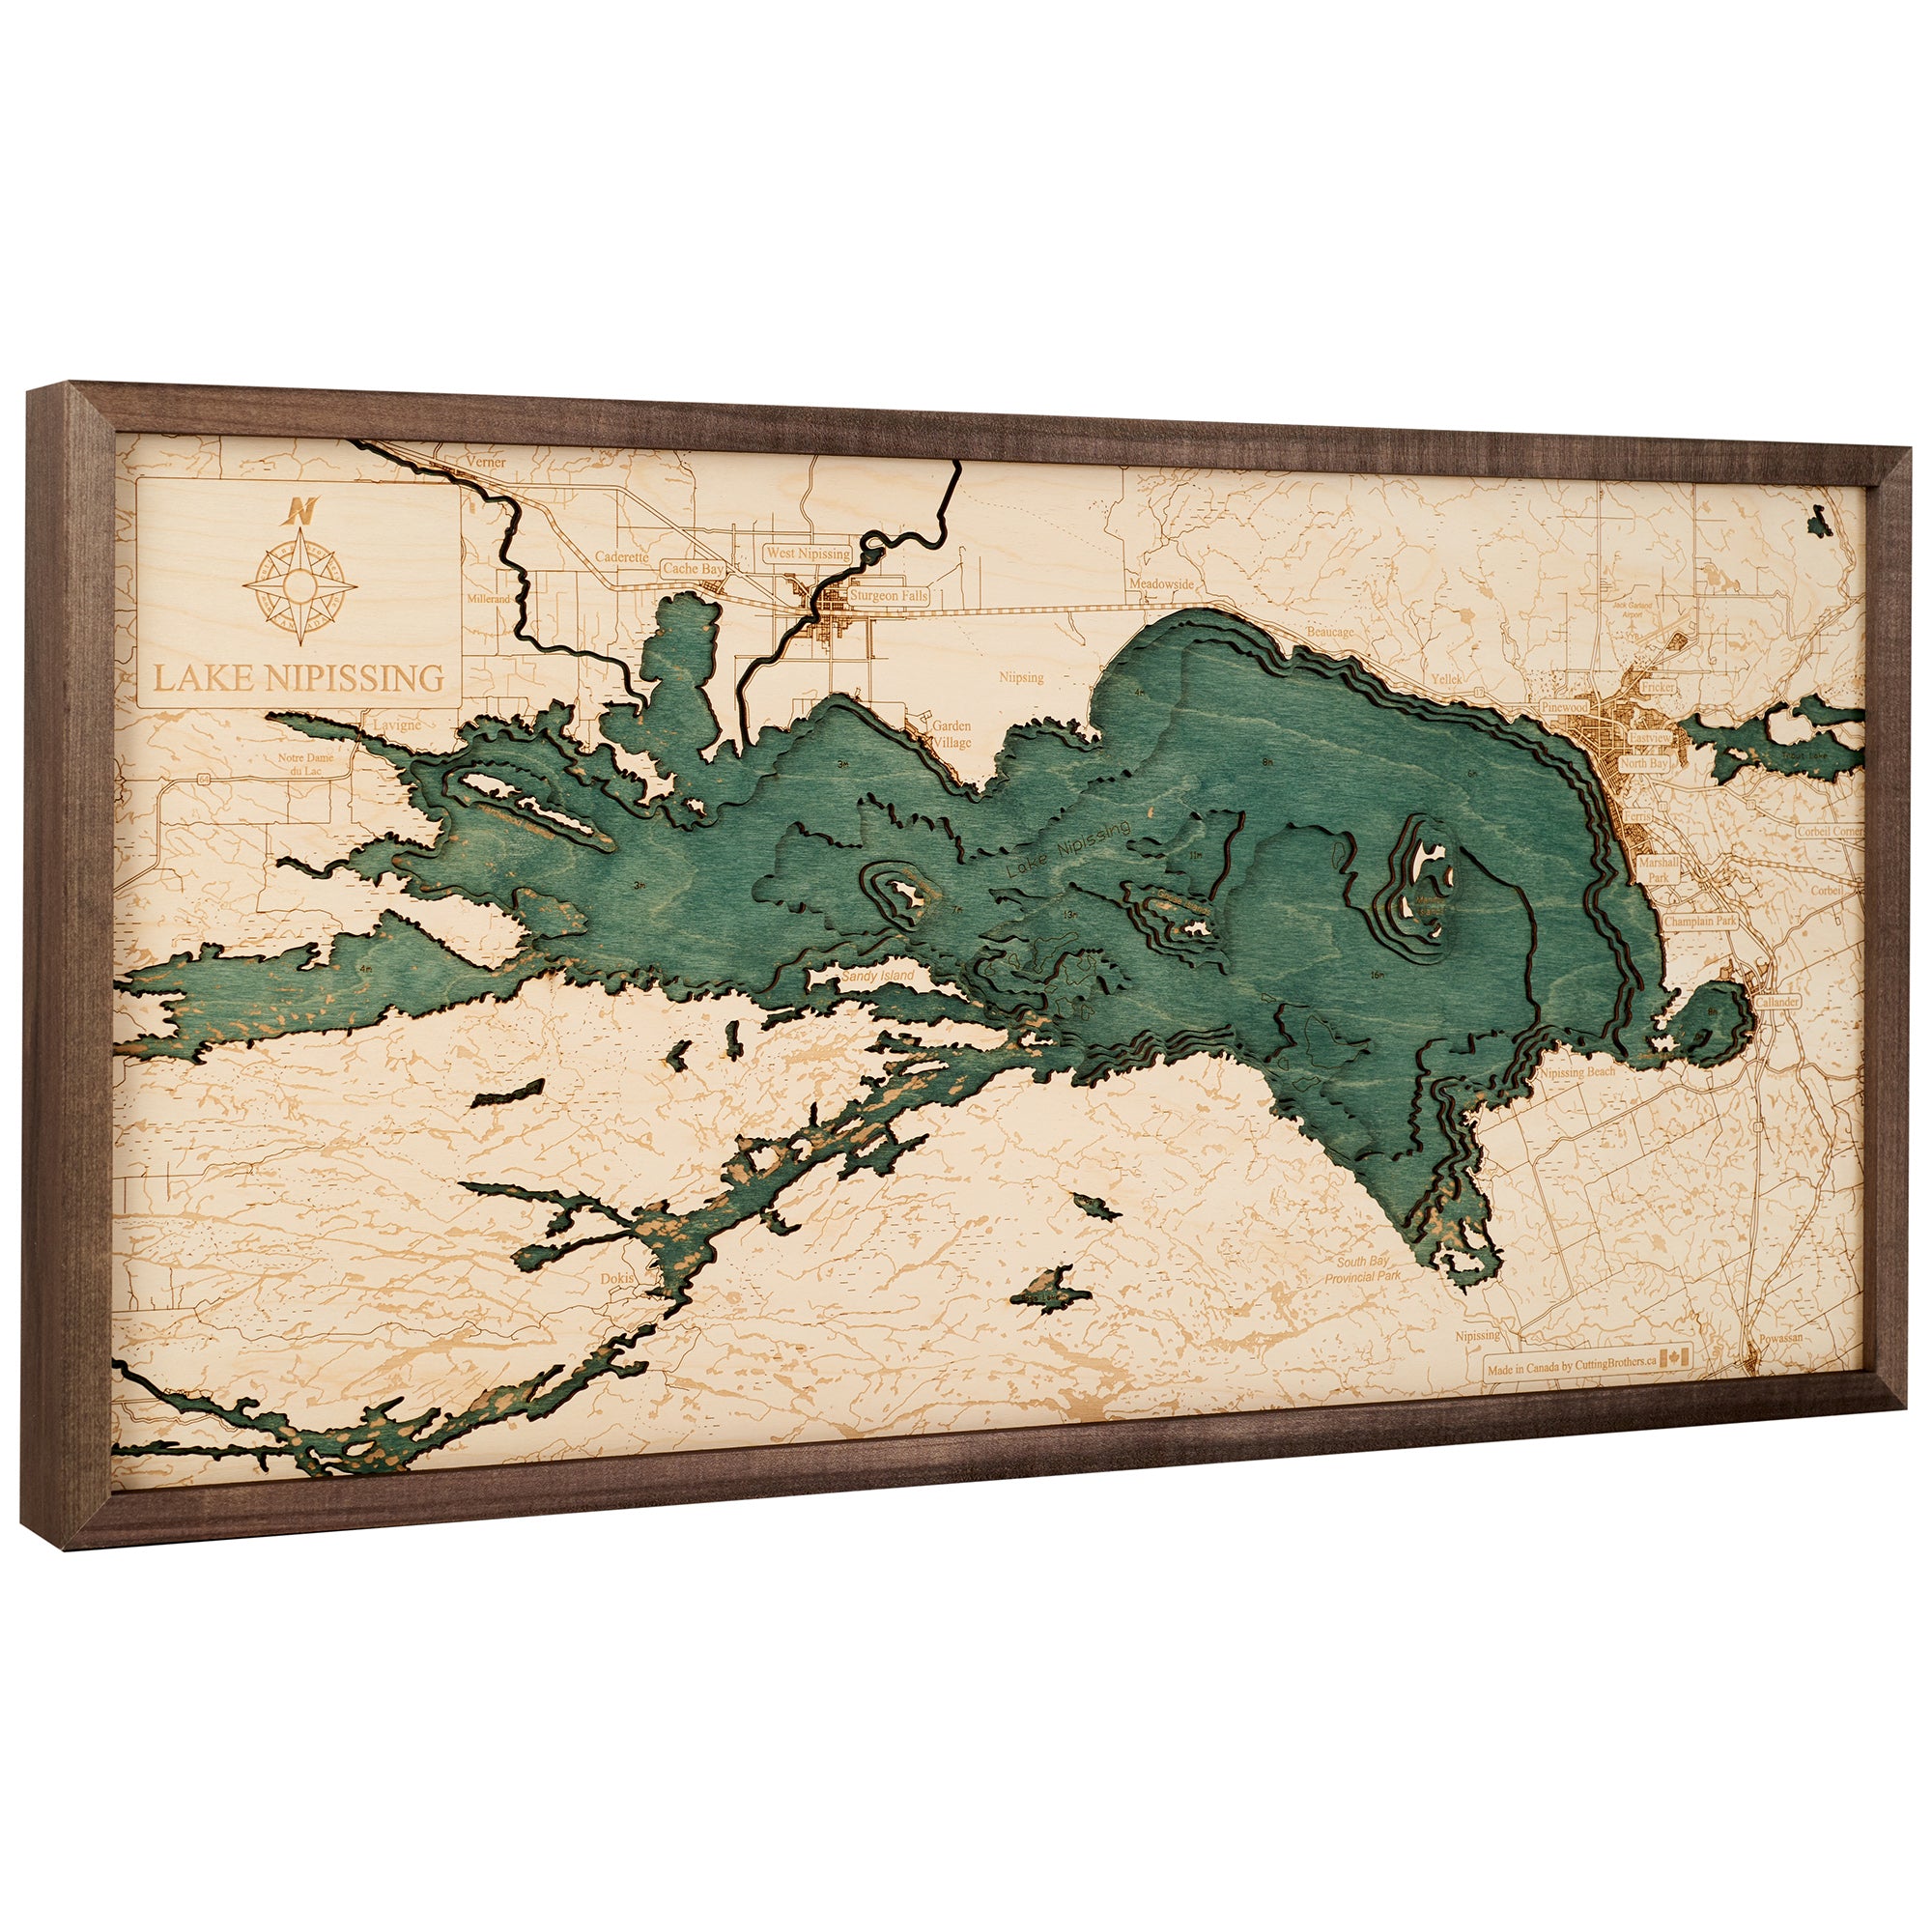 LAKE NIPPISSING 3D WOODEN WALL MAP - Version M